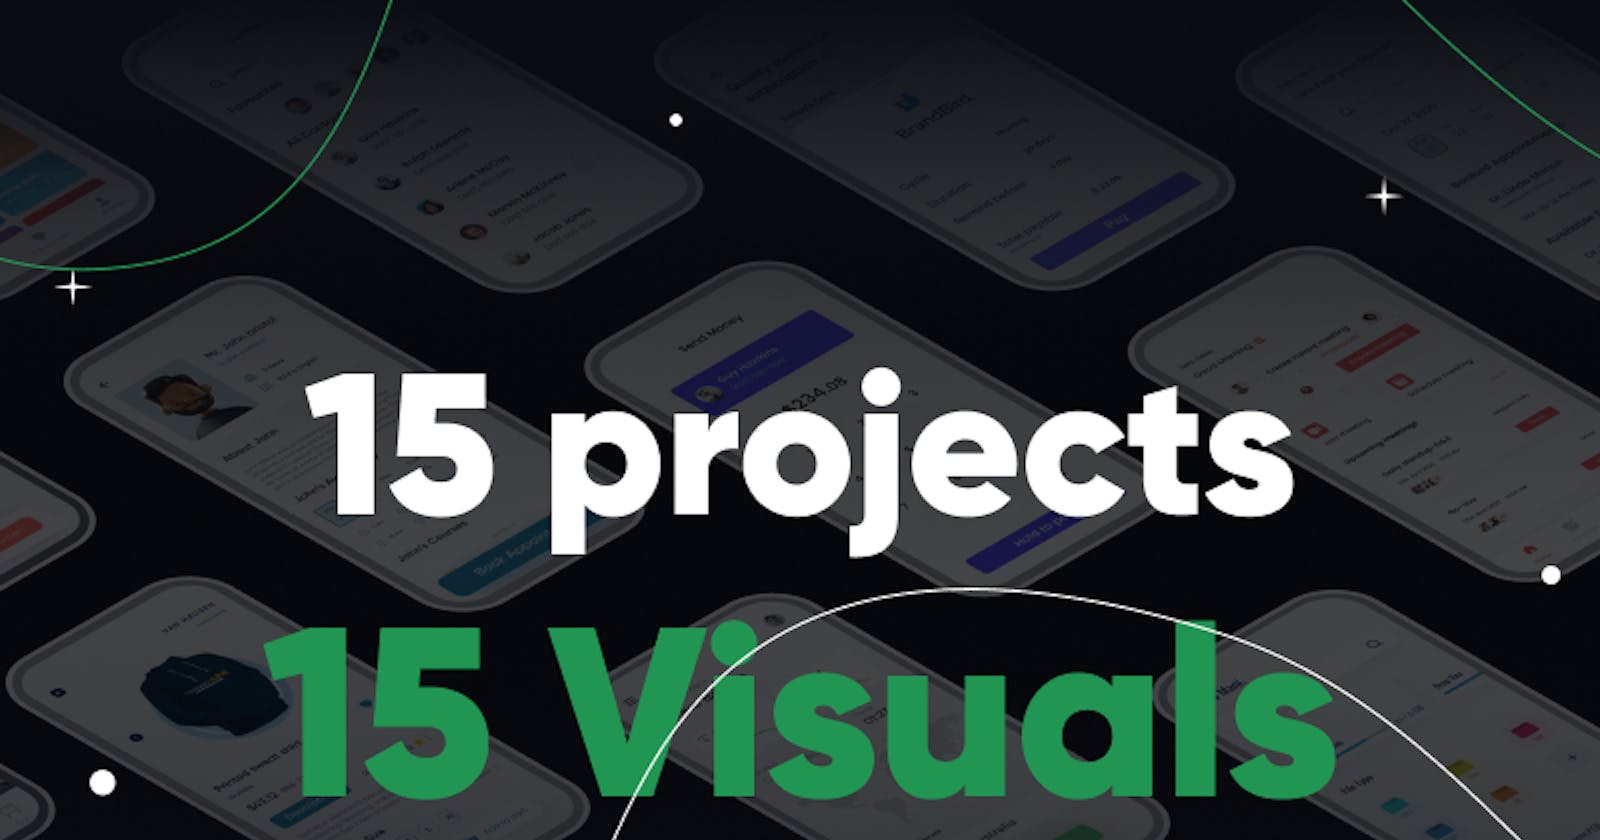 Design Projects to practice with visual examples